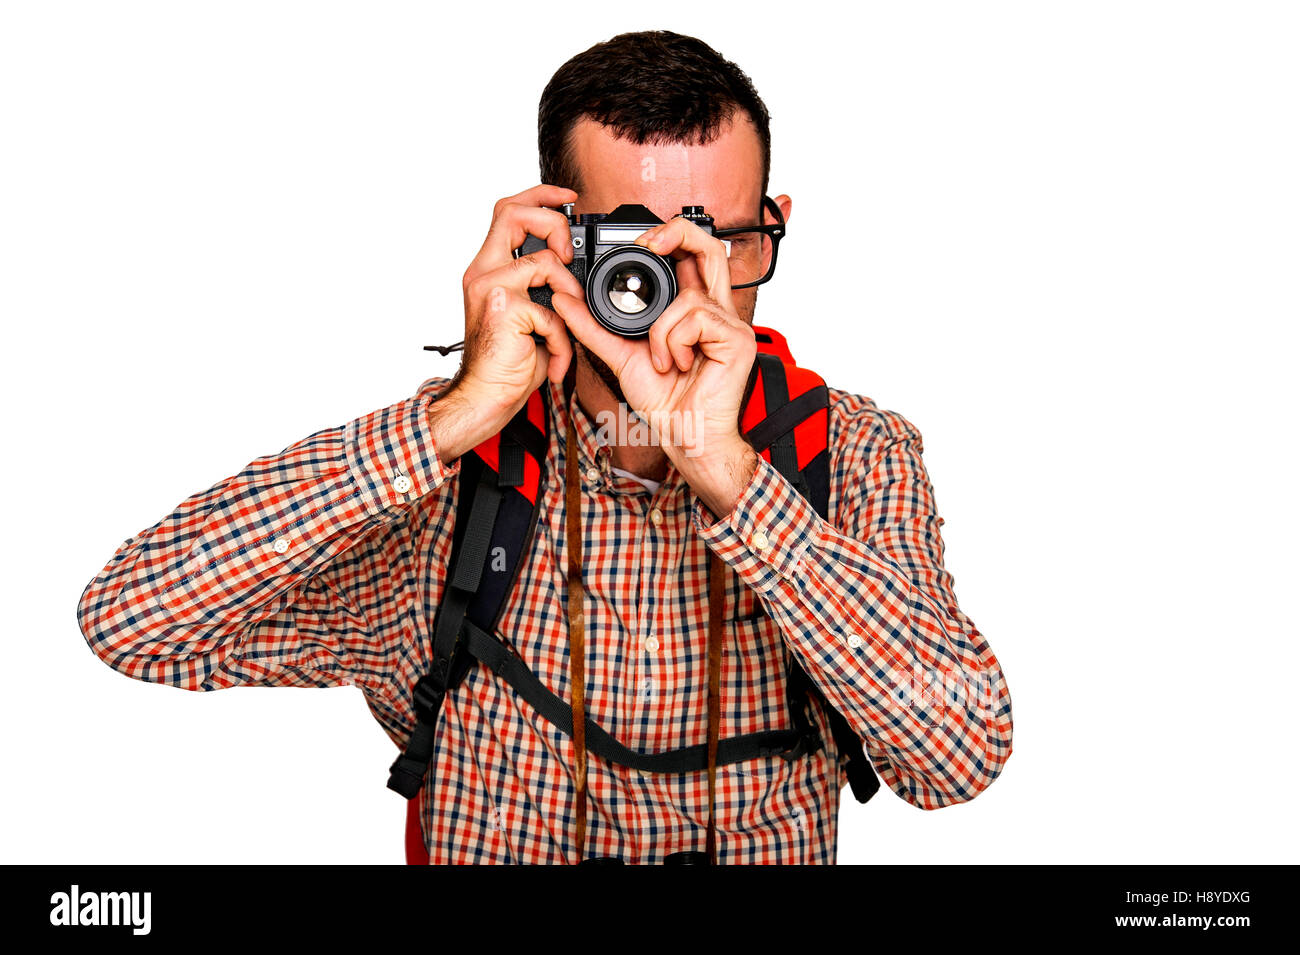 Man tourist backpacker on trip taking photo picture with camera. Stock Photo